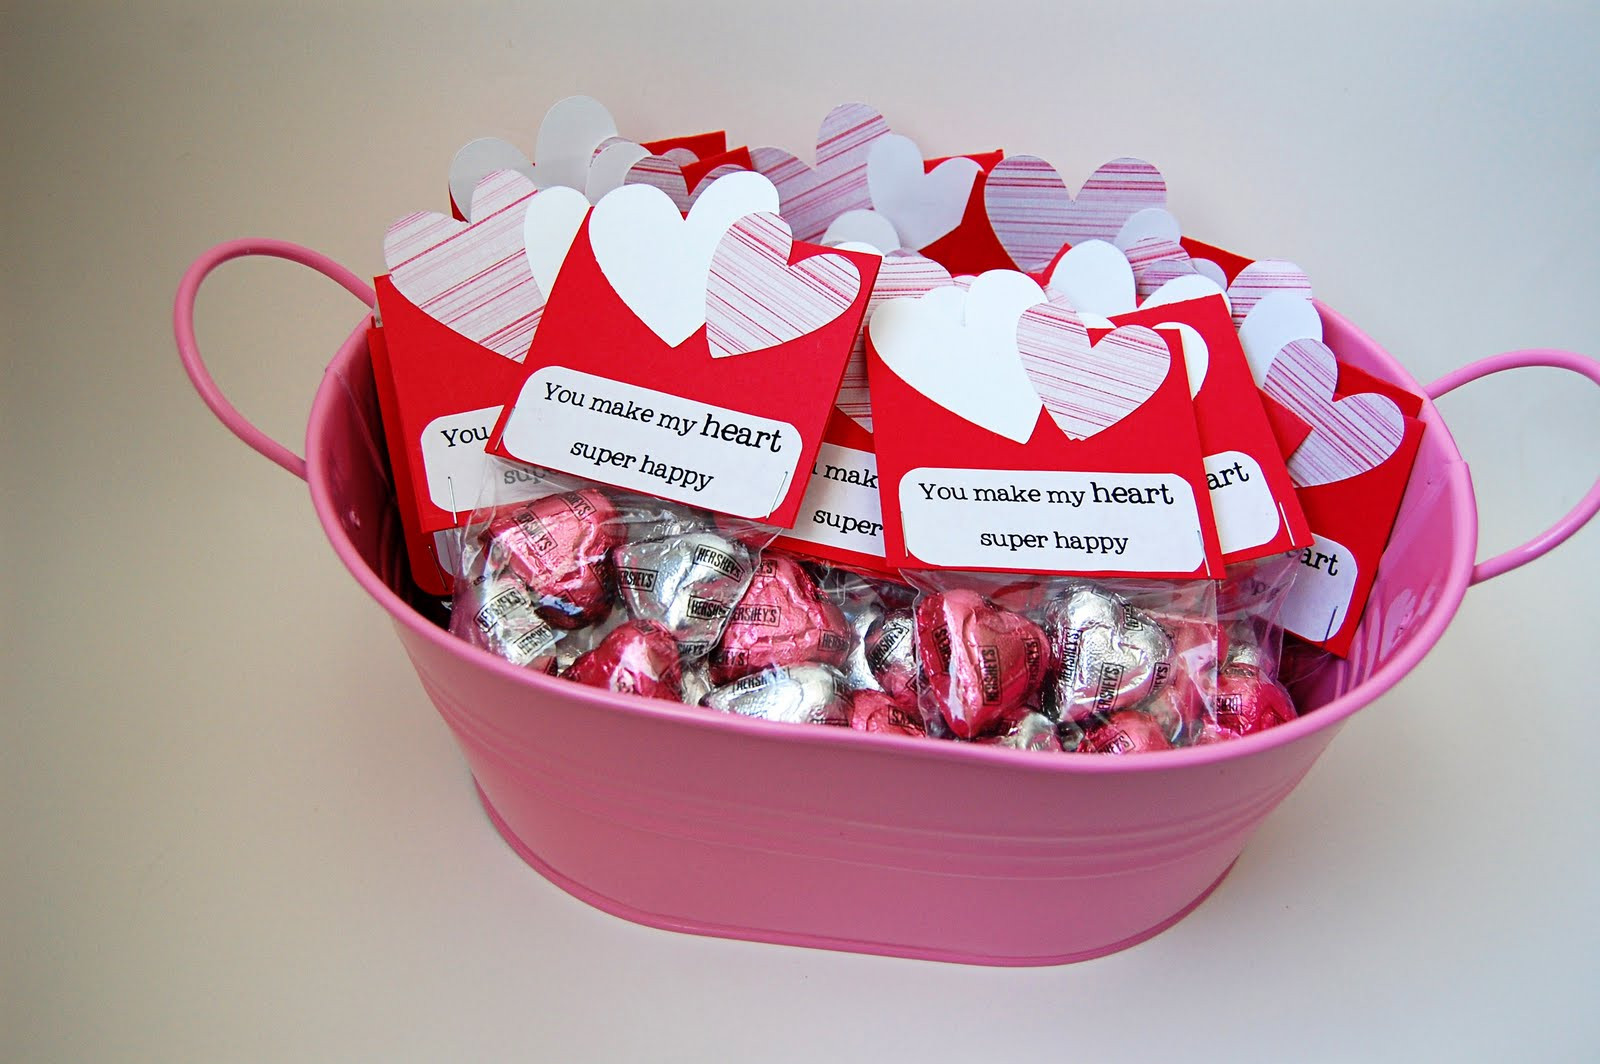 Valentines Day Gift Ideas Diy
 45 Homemade Valentines Day Gift Ideas For Him